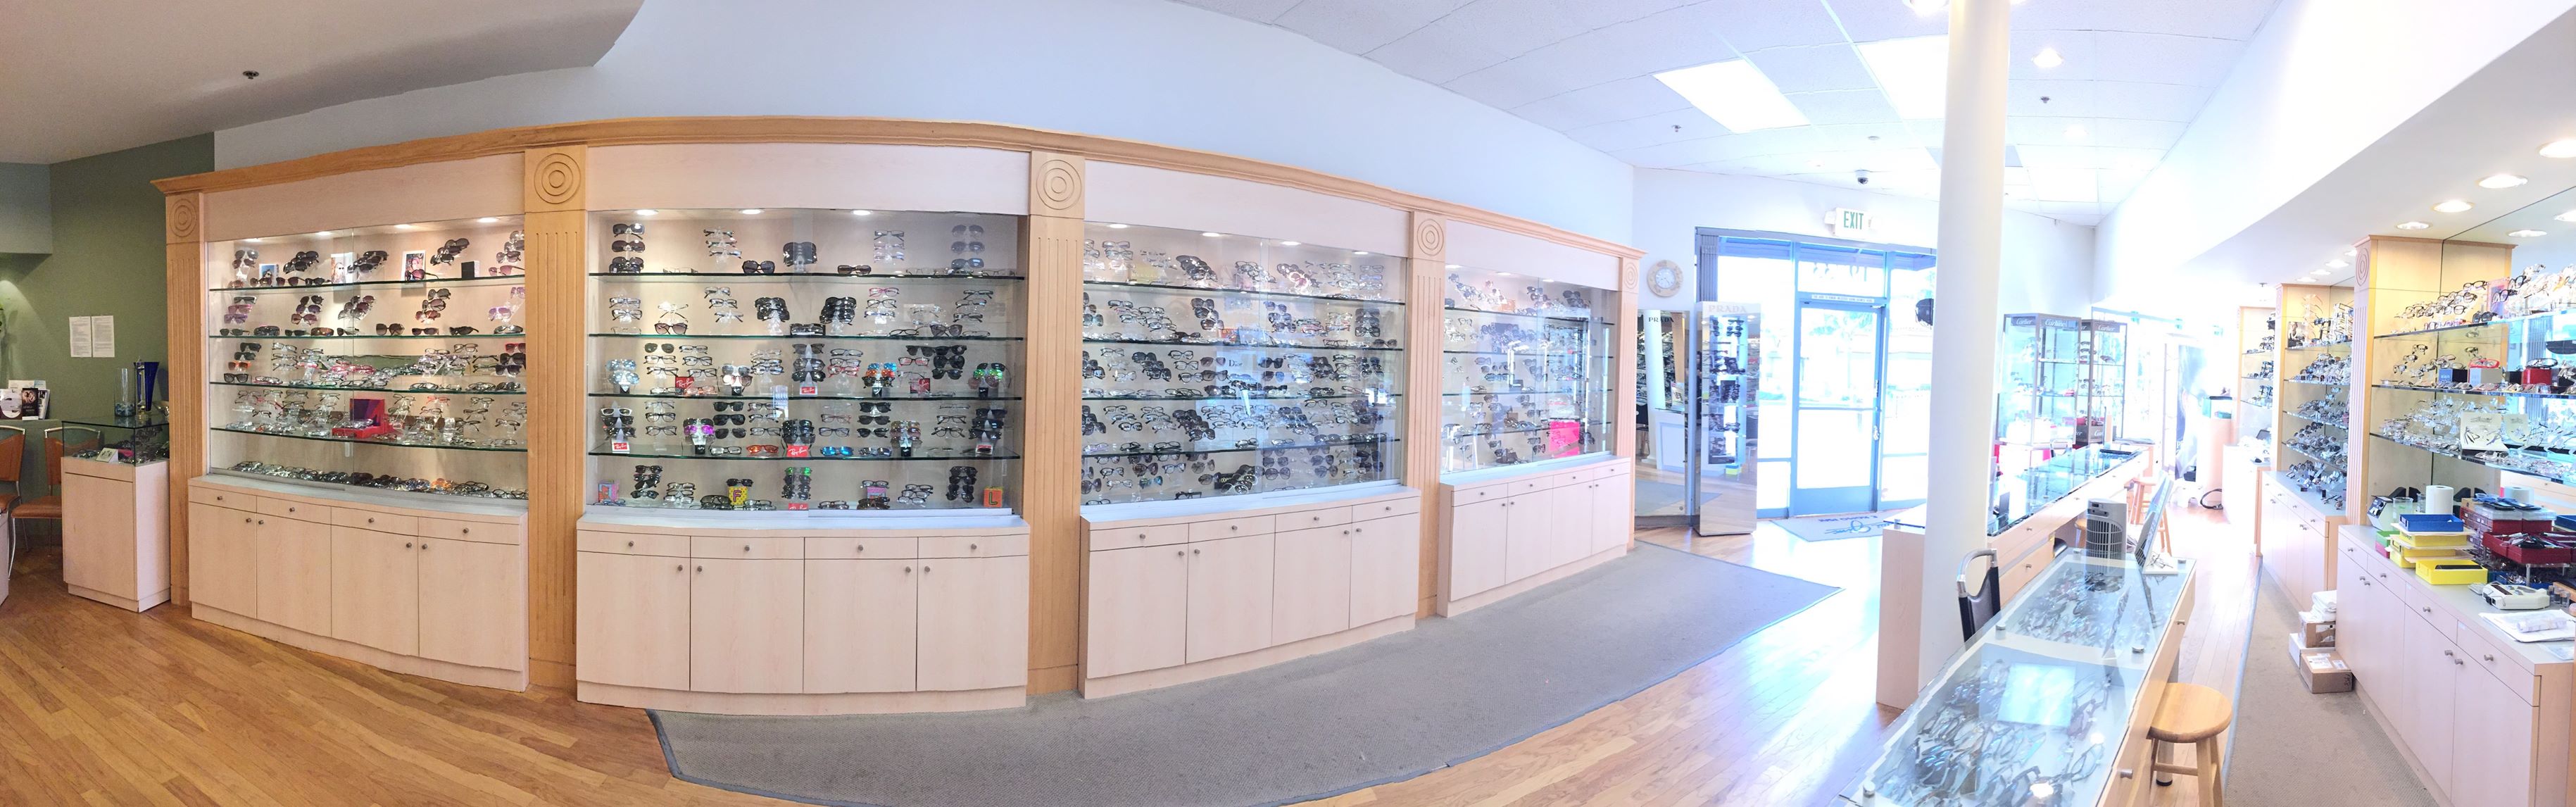 Visionmax Optometry Porter Ranch